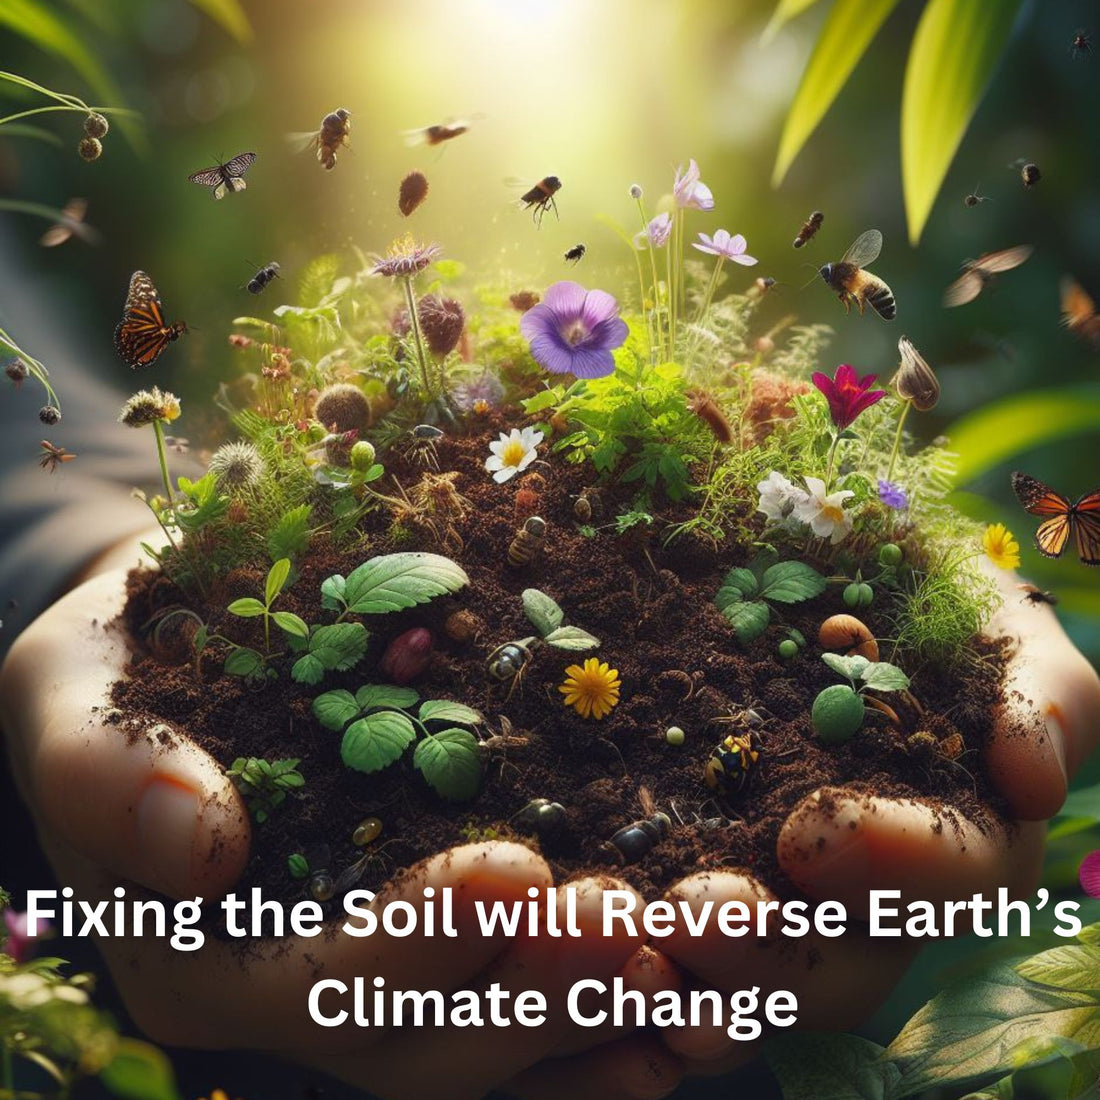 Fixing the Soil will Reverse Earth’s Climate Change